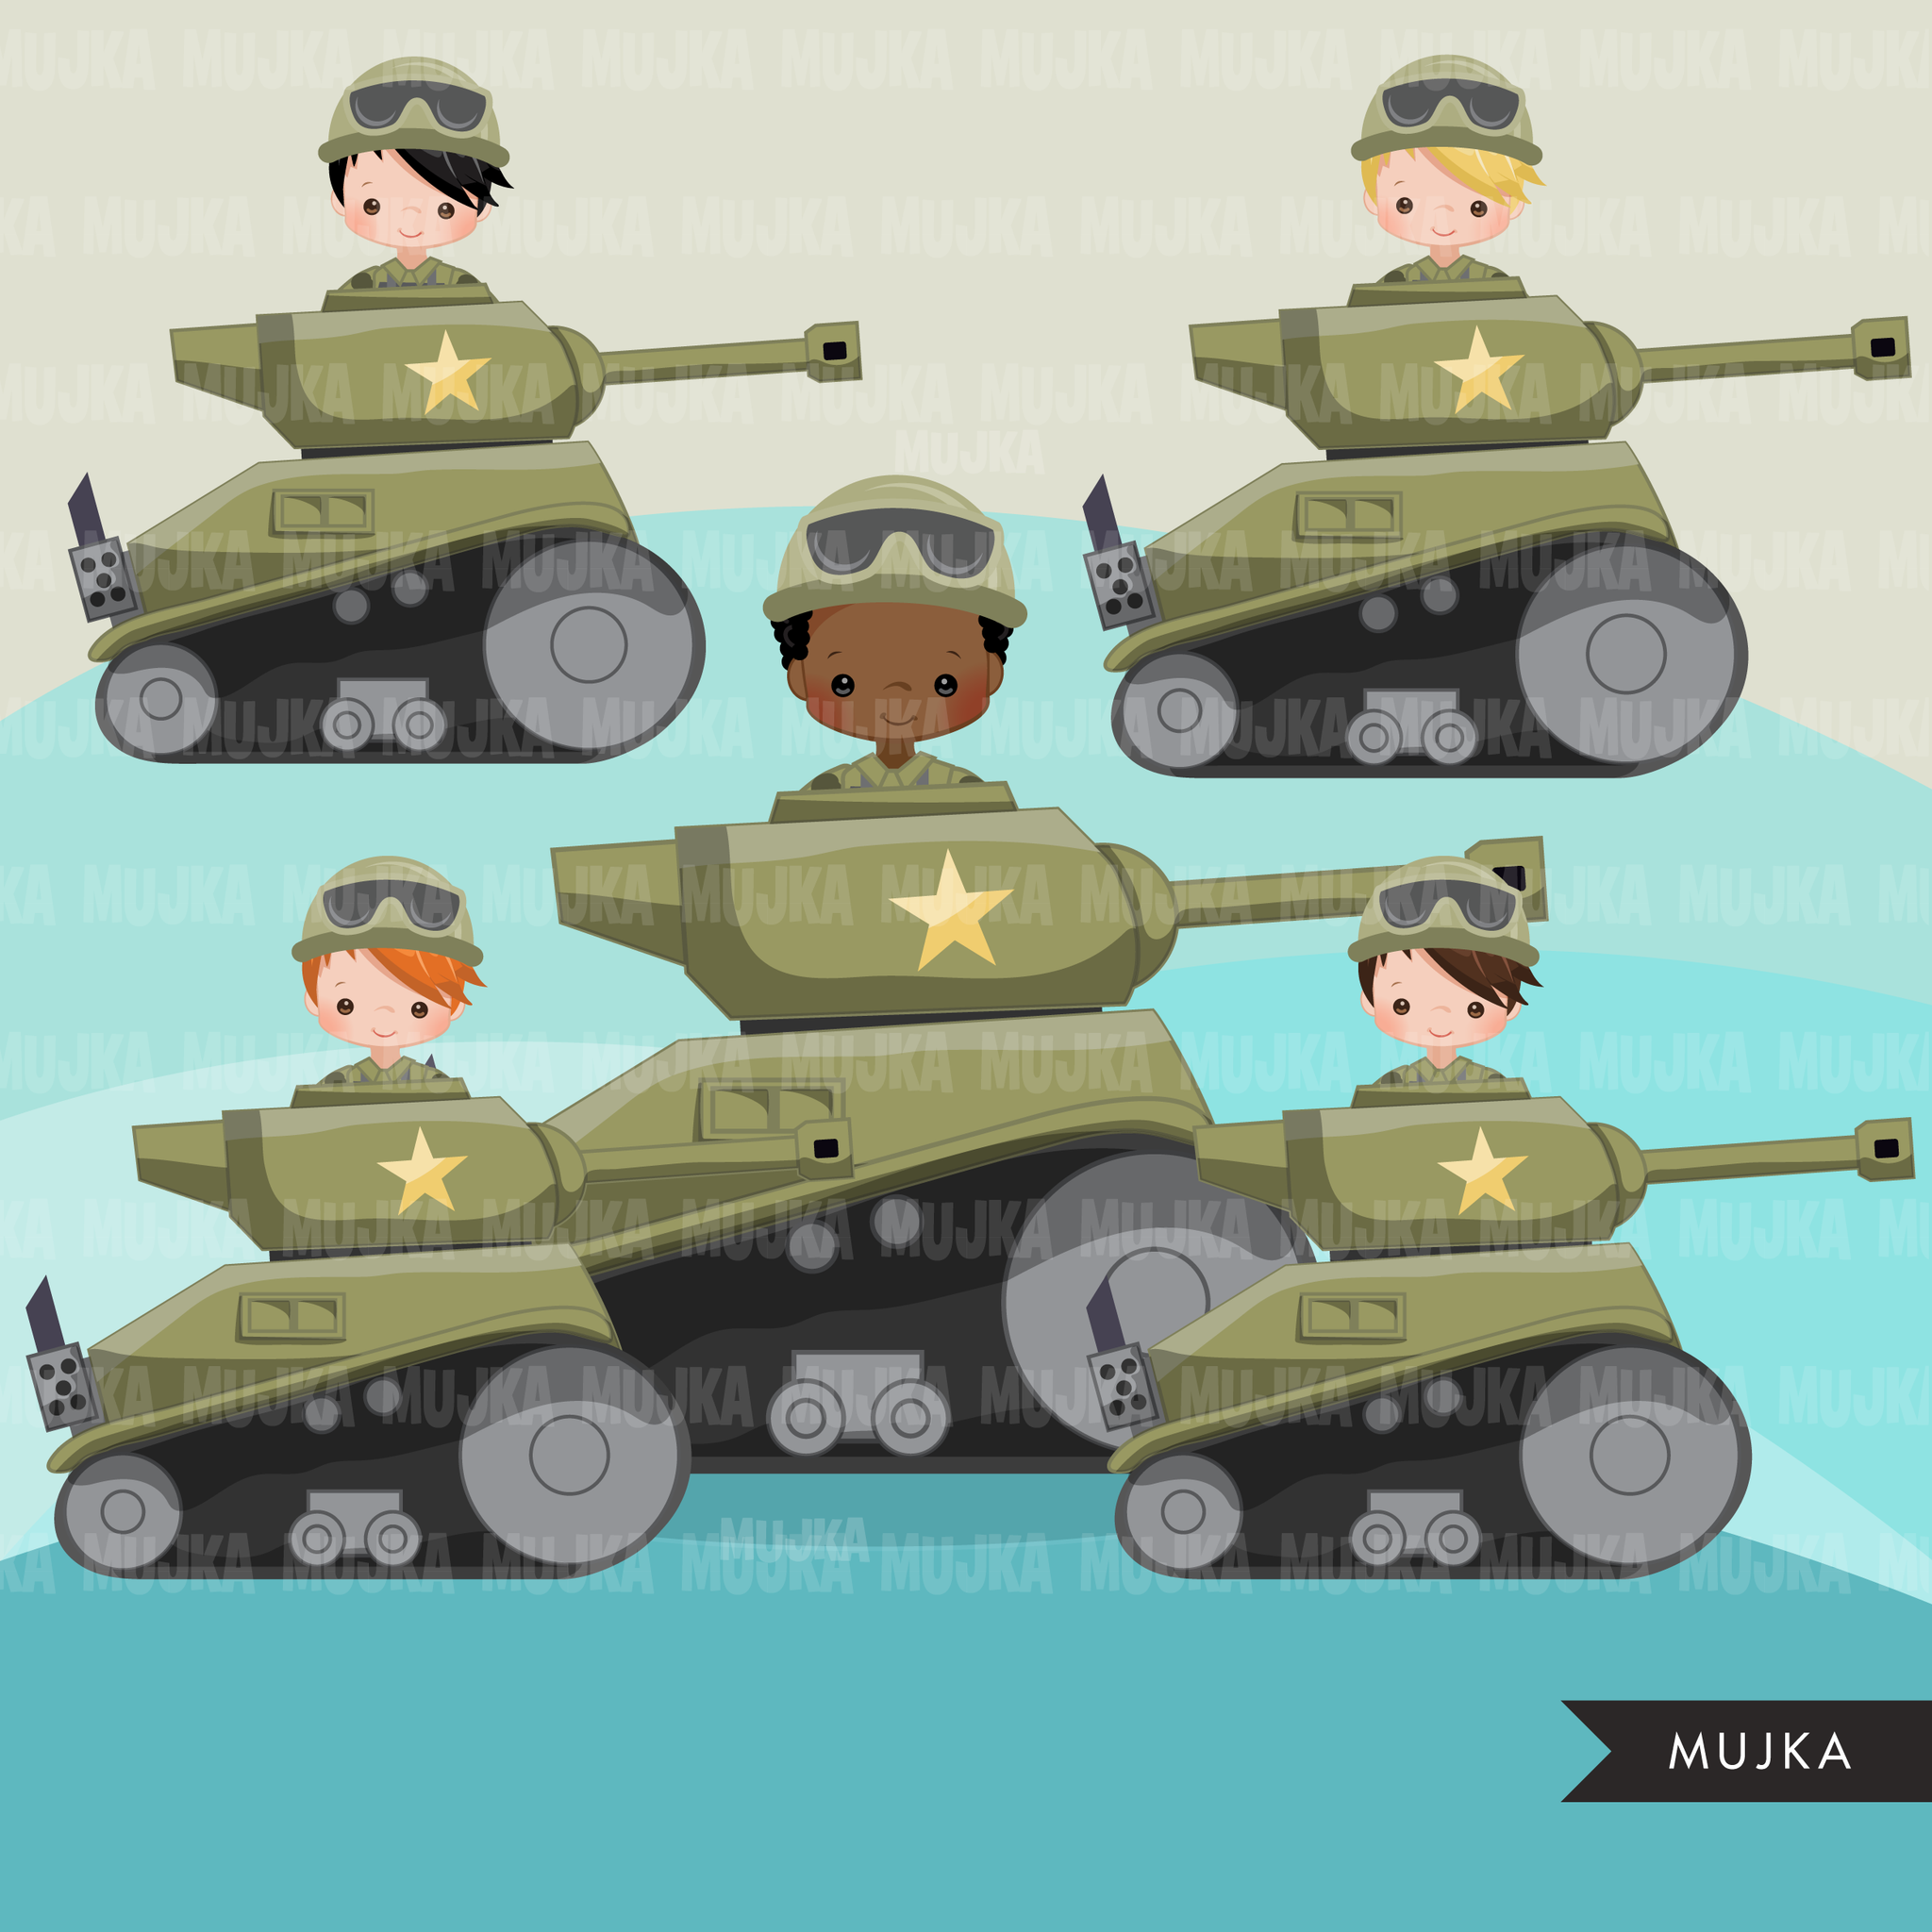 War Tank Military Images  Free Photos, PNG Stickers, Wallpapers